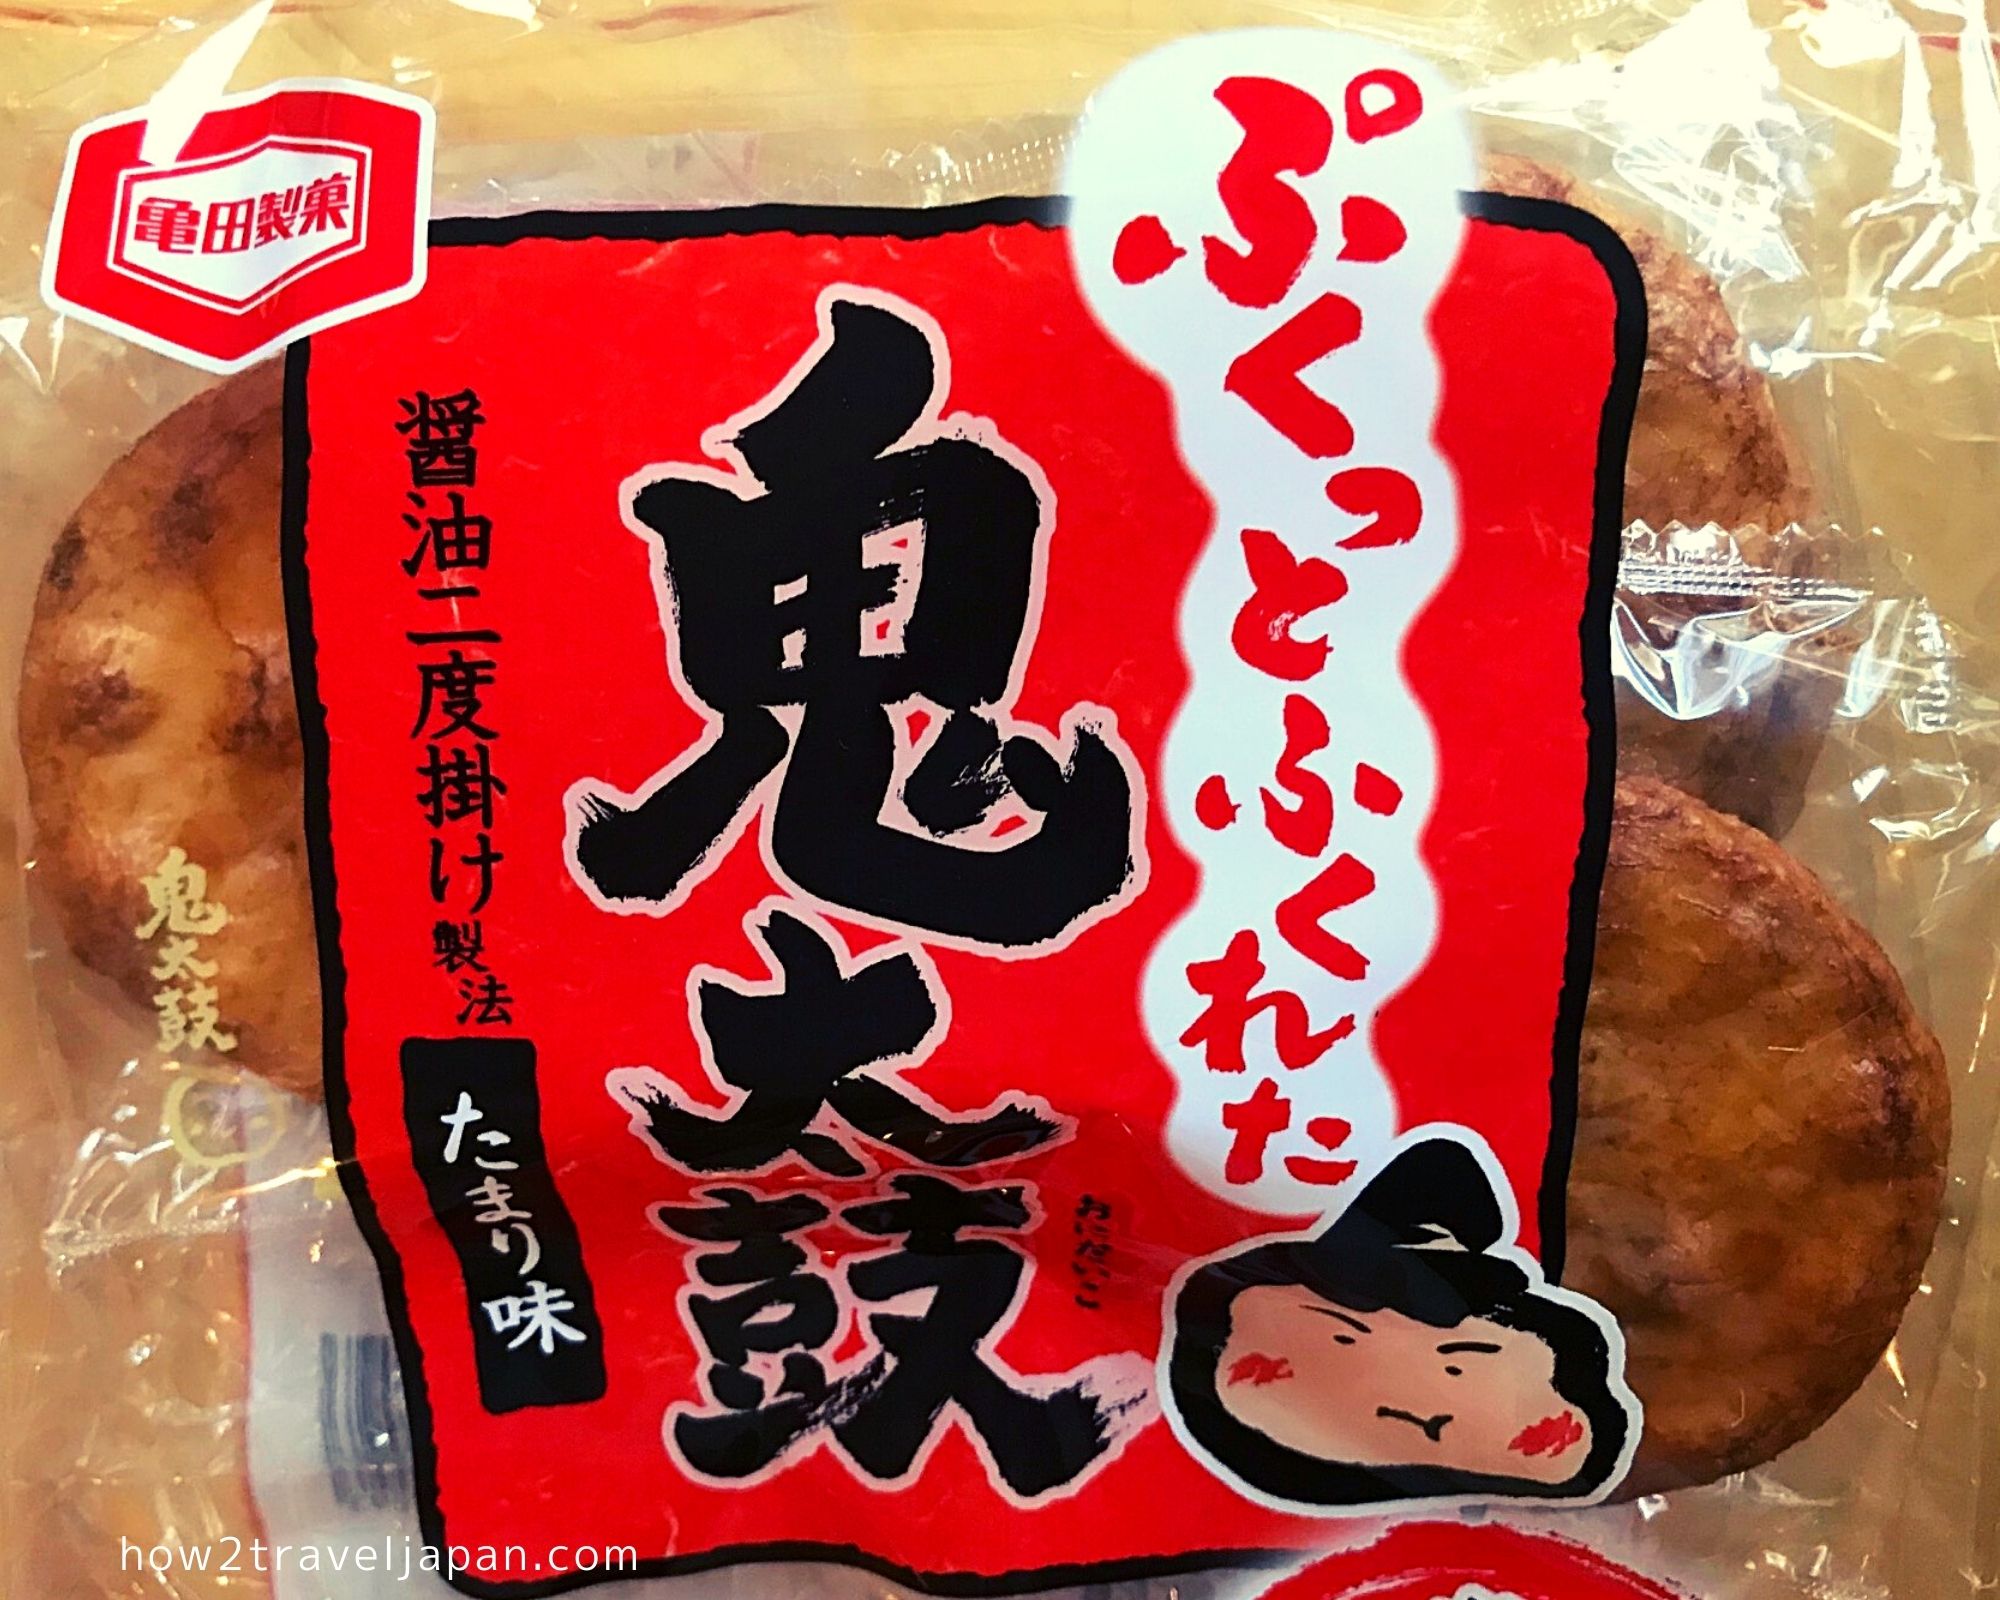 You are currently viewing The Onidaiko Senbei from Kameda